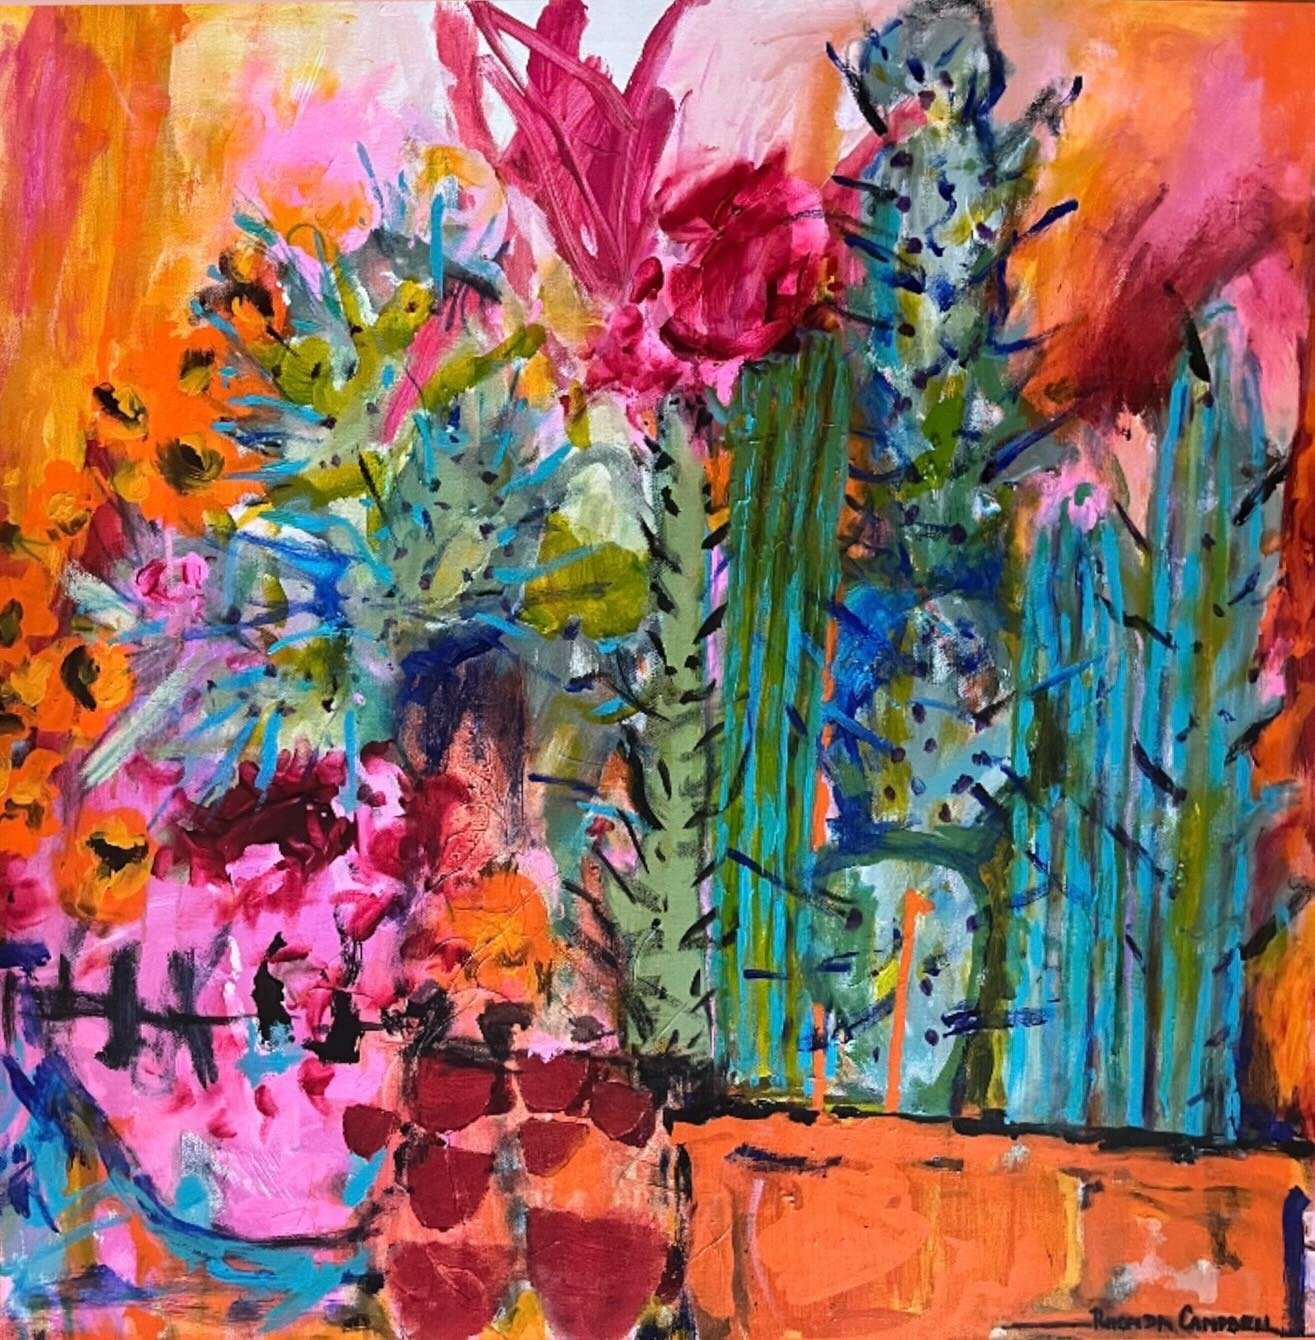 MEXICAN MEMORIES&hellip;come join the fun with some bubbles tonight ..for the group exhibition BLOOM&hellip;.@thepeisleystgallery  6pm &hellip;Opening night&hellip;all welcome.This is one of my works,inspired by a recent trip to Mexico&hellip;flower 